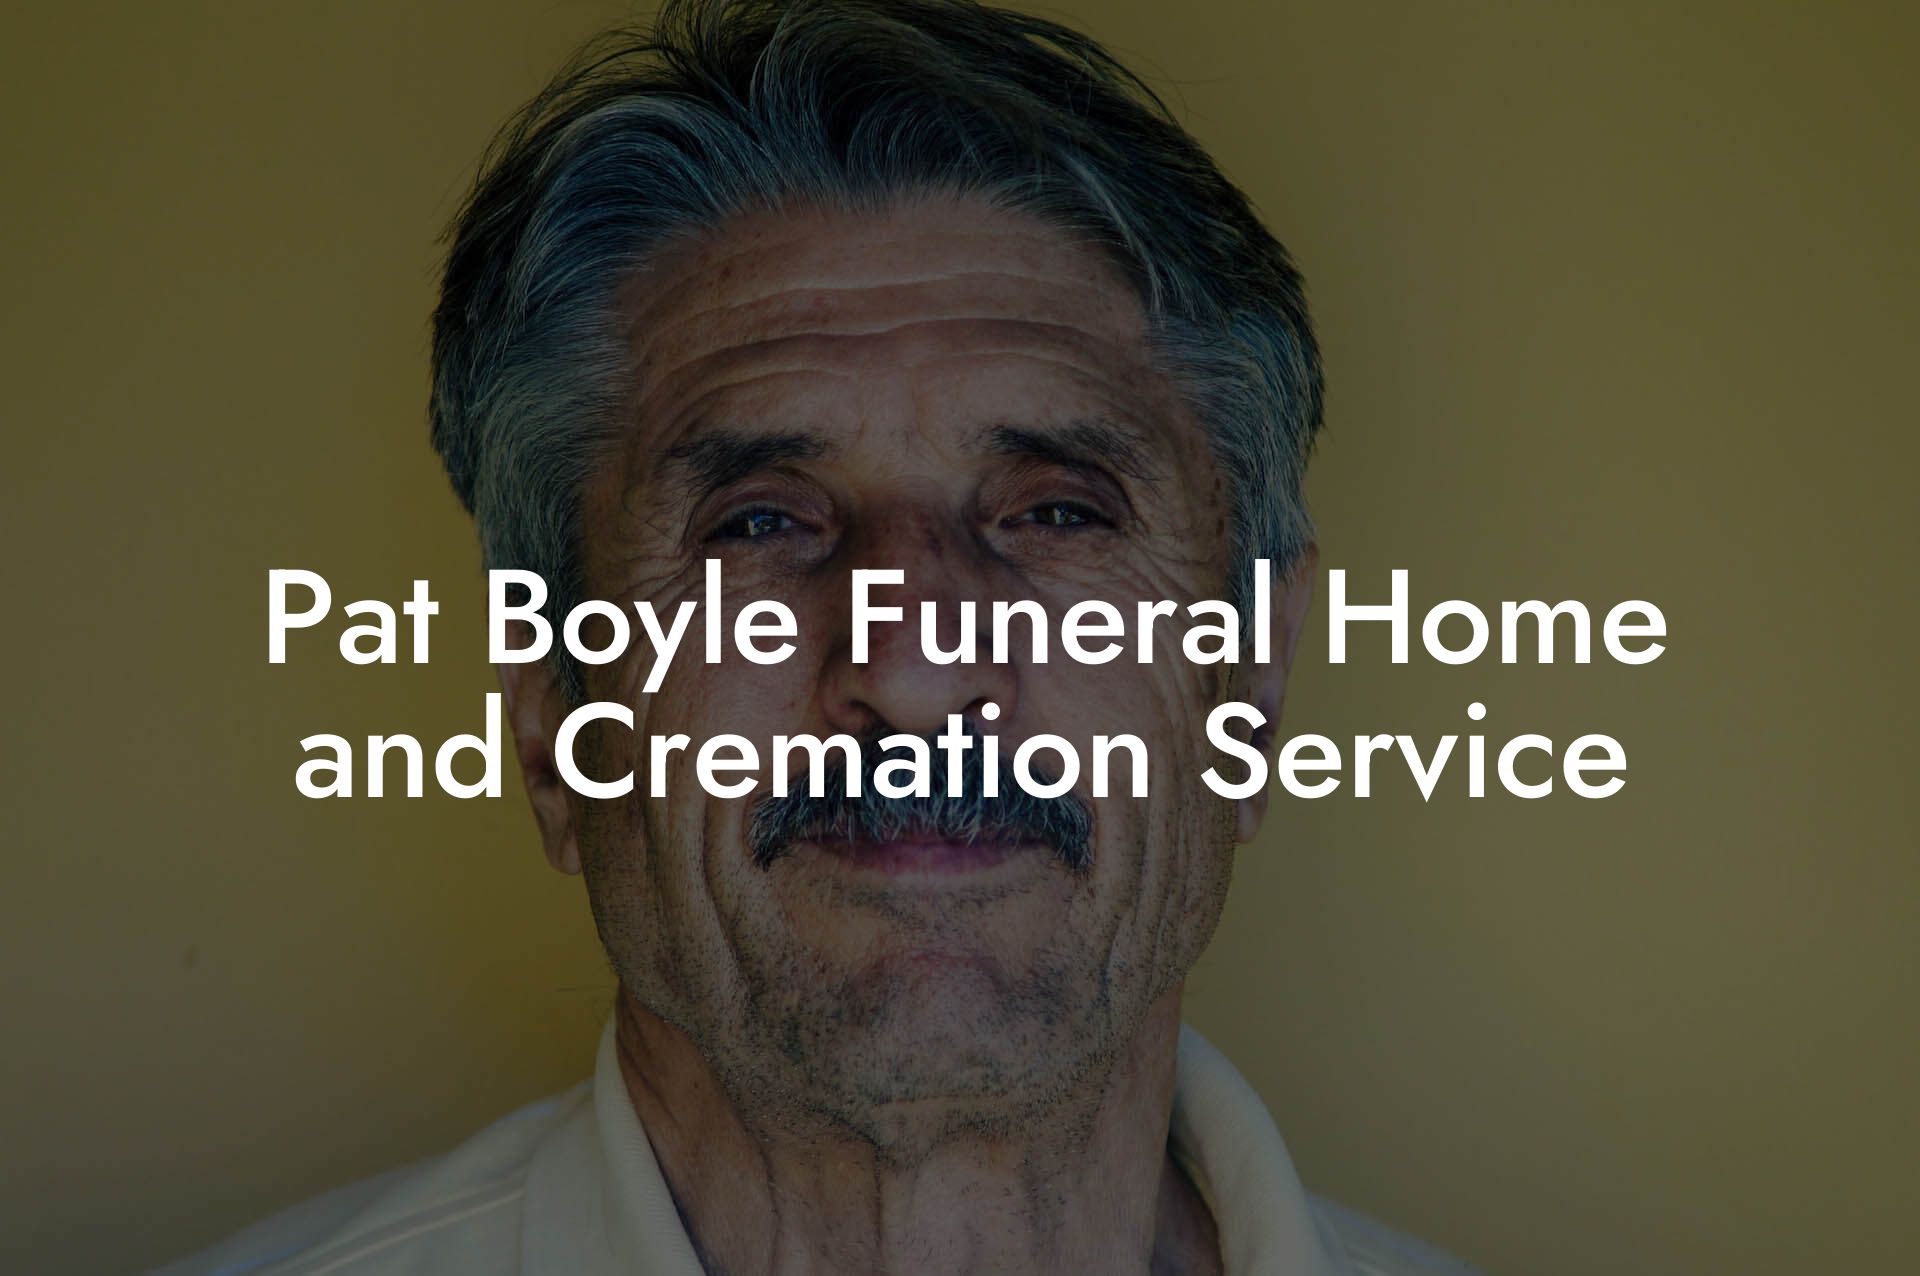 Pat Boyle Funeral Home and Cremation Service